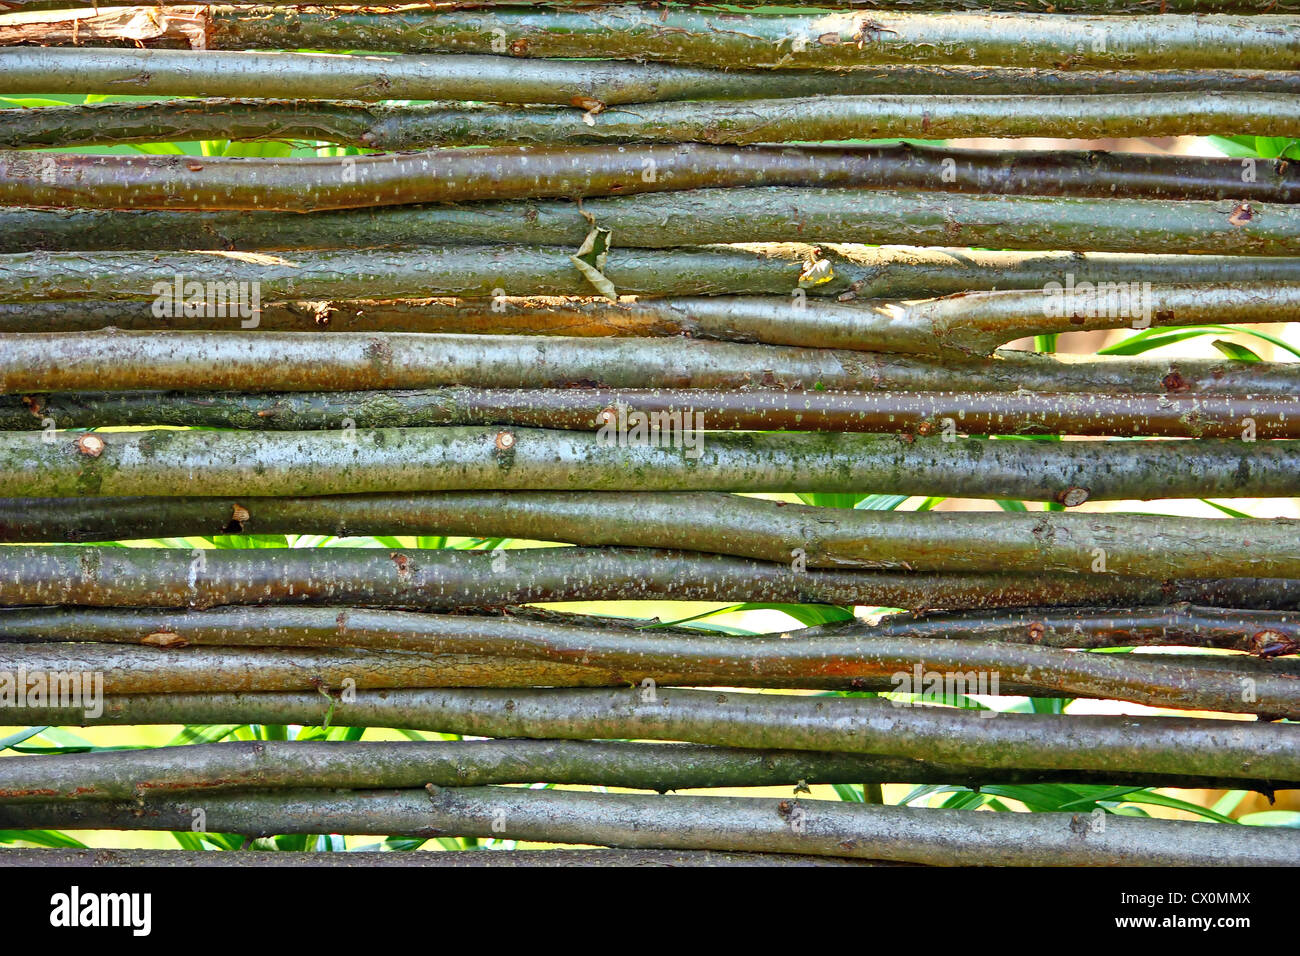 Wooden fence made from branches, natural Stock Photo